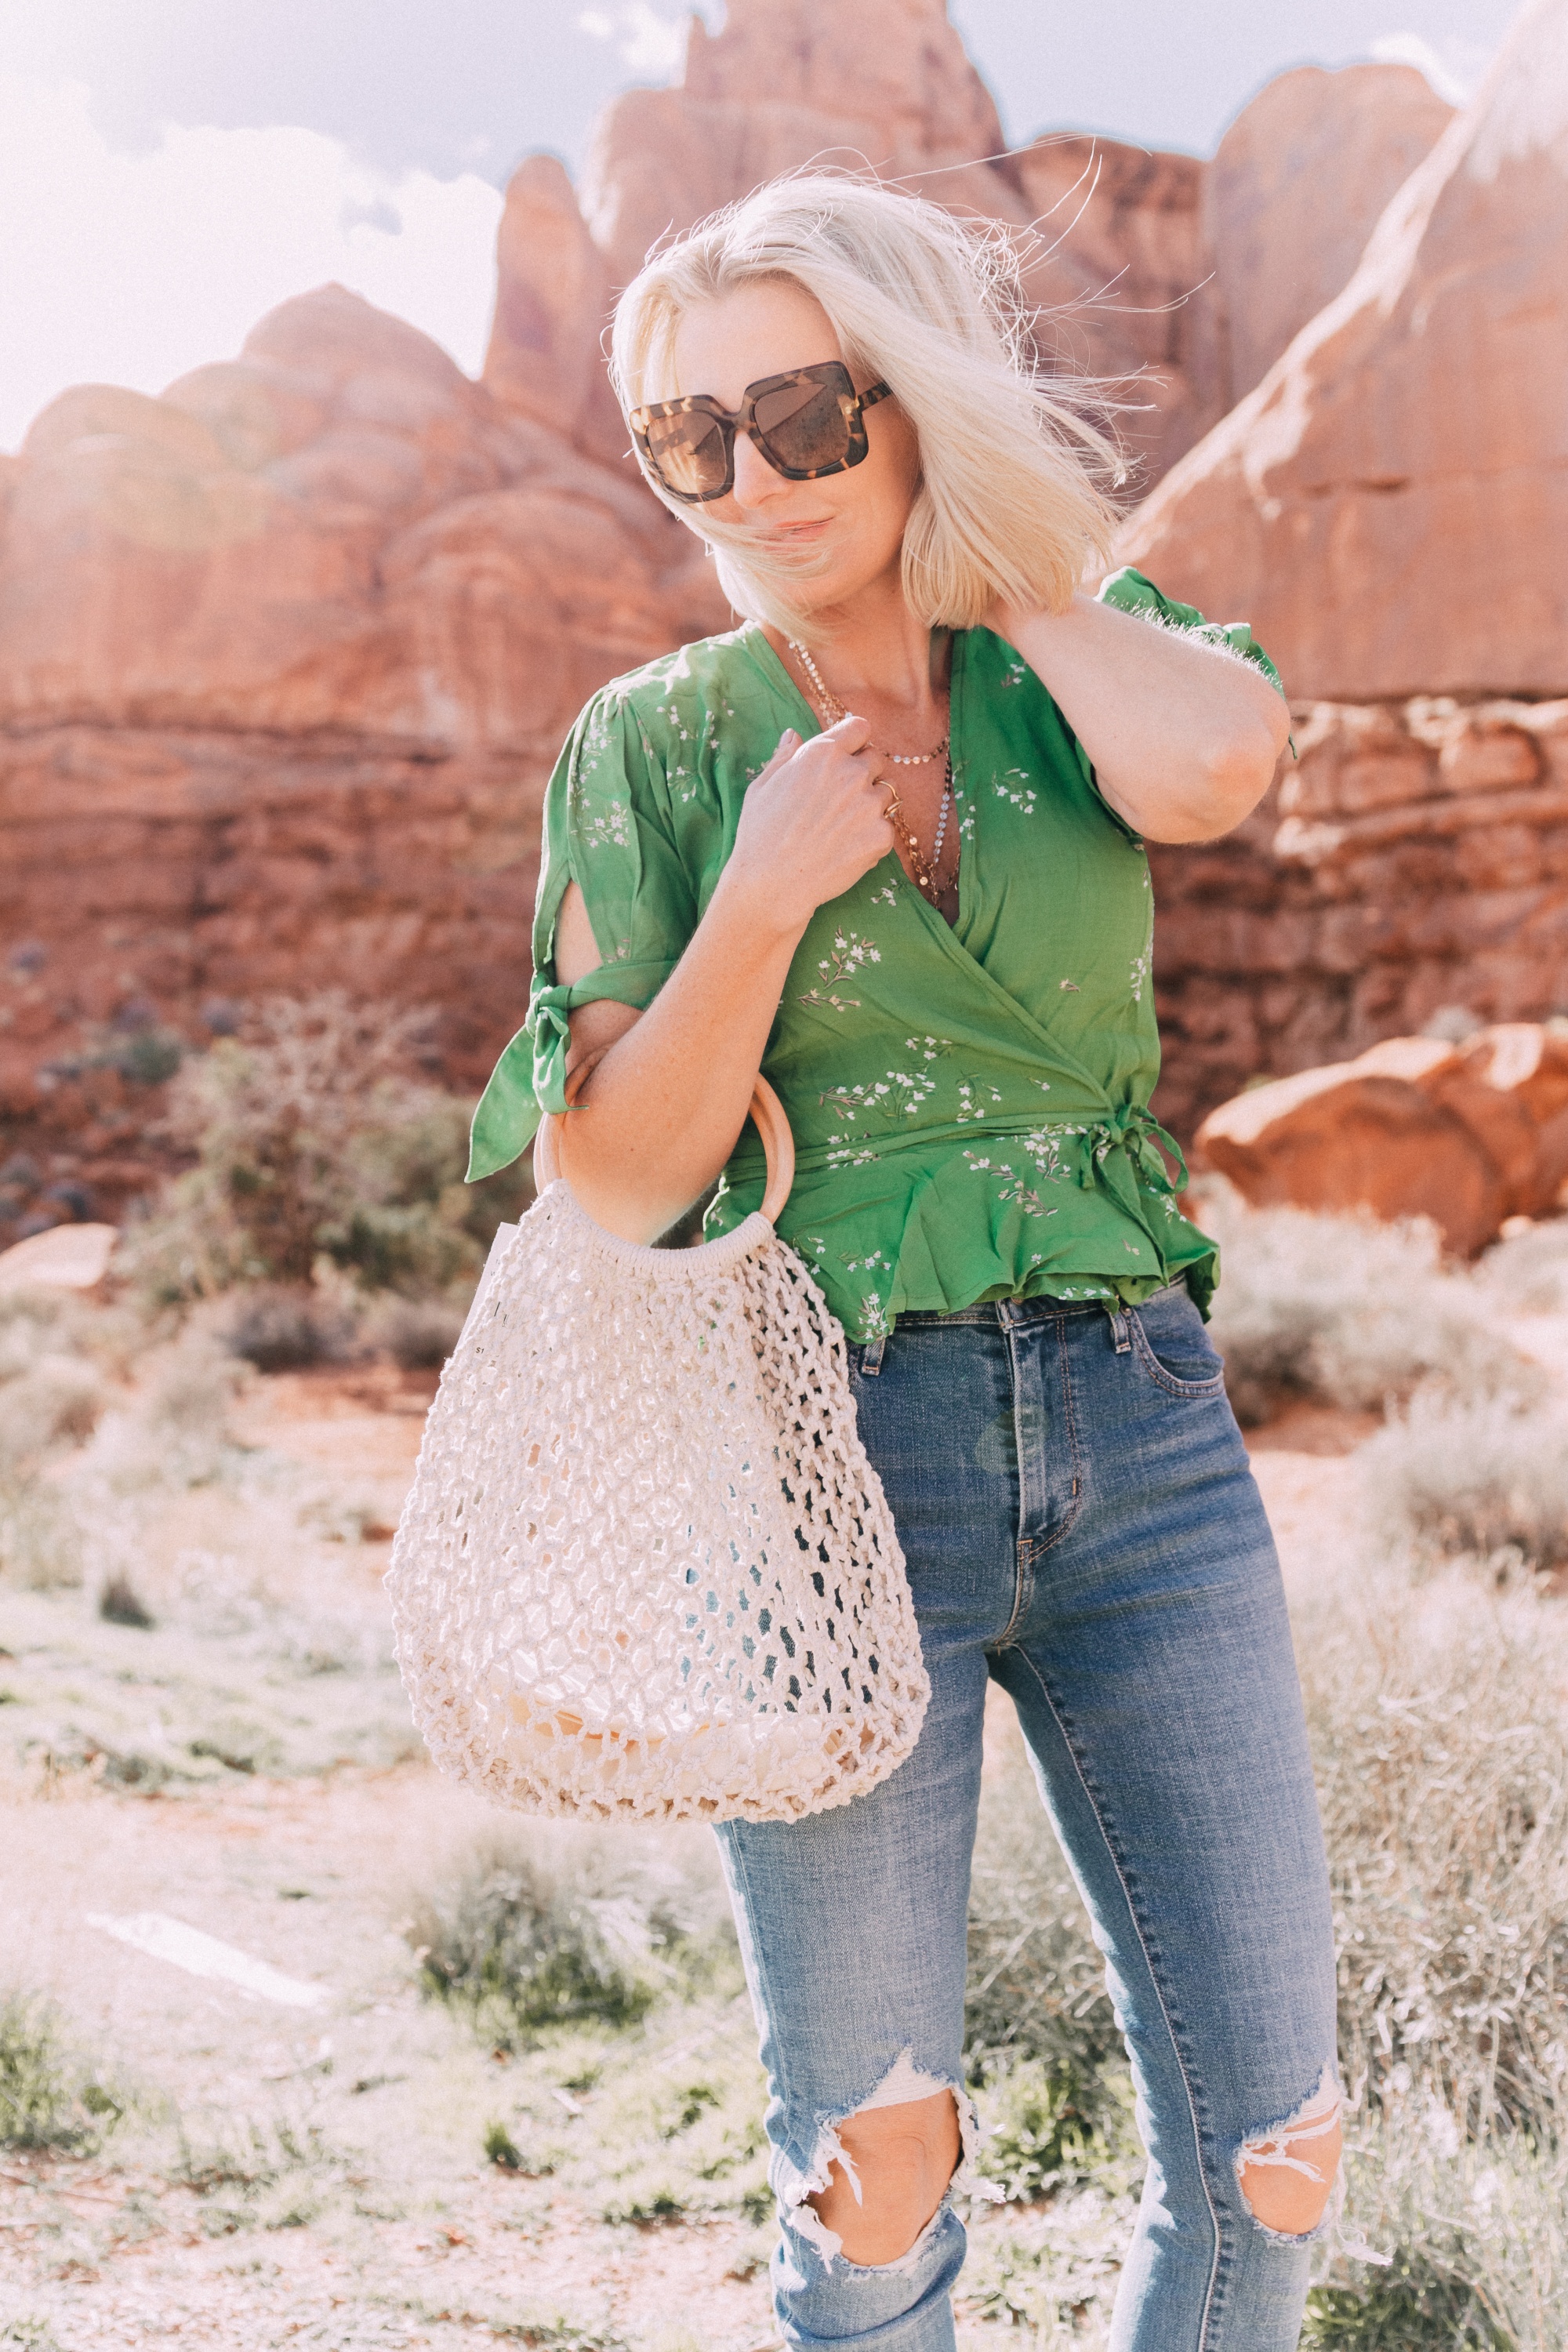 fashion blogger wearing faithfull the brand green lucy wrap top and levi's 721 skinny blue jeans carrying open knit white handbag